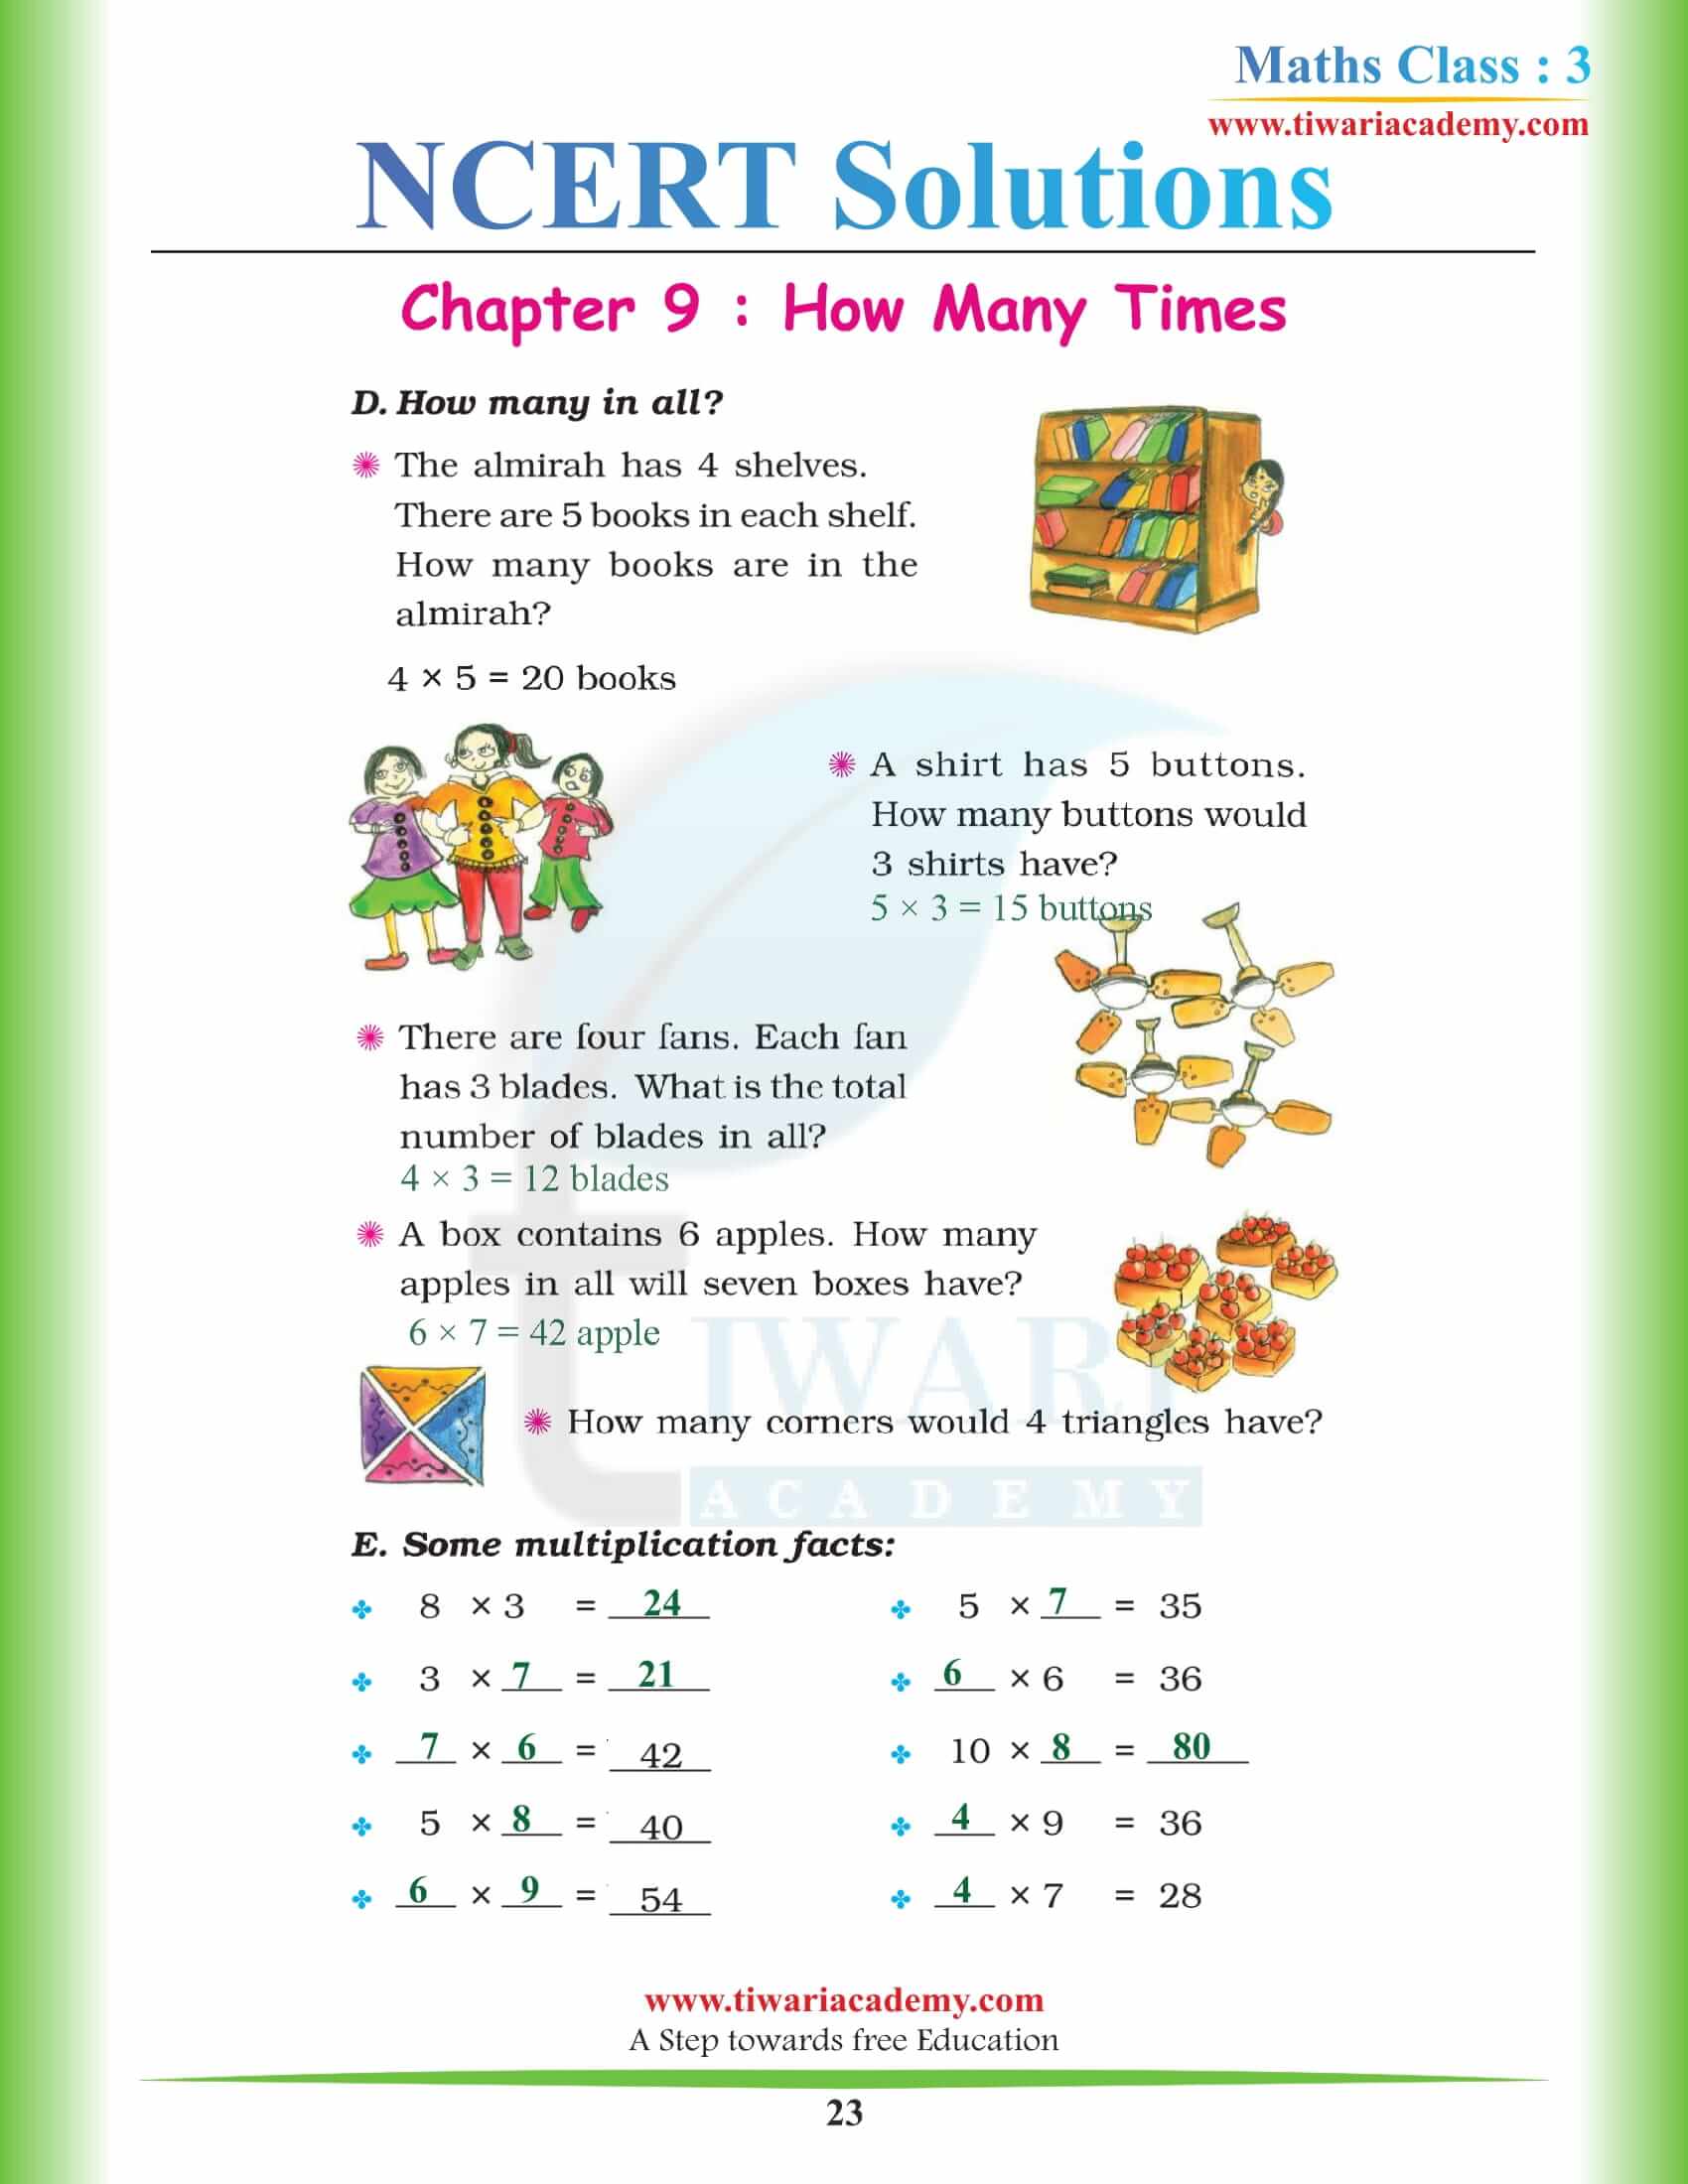 Standard 3 Maths NCERT Chapter 9 Solutions in English